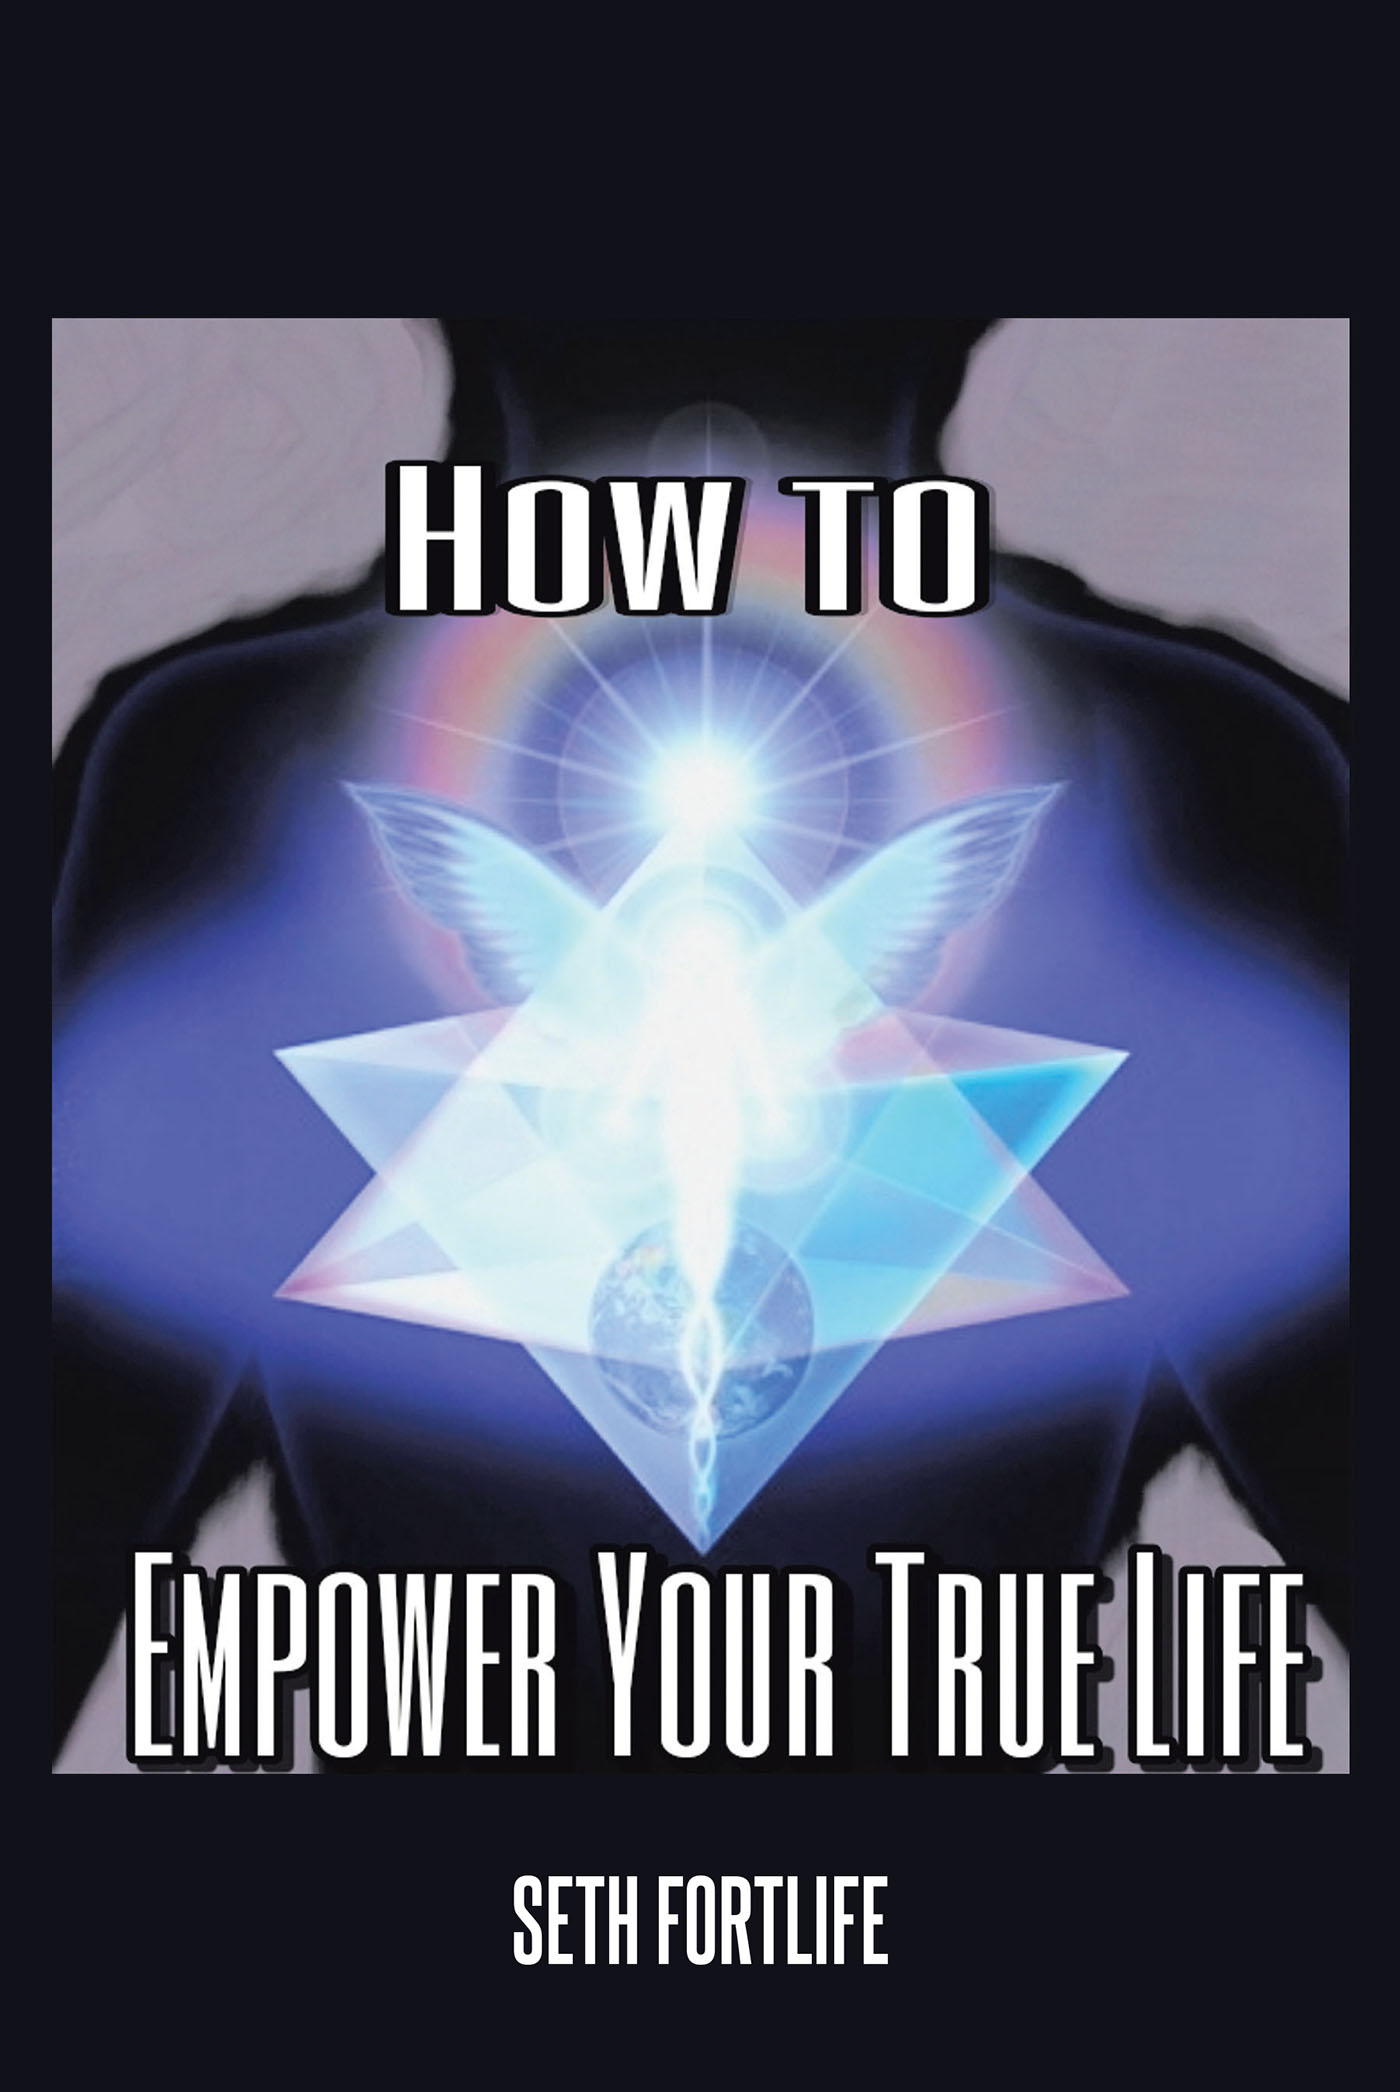 Seth Fortlife’s Newly Released "How to Empower Your True Life" is a Transformative Guide to Self-Realization